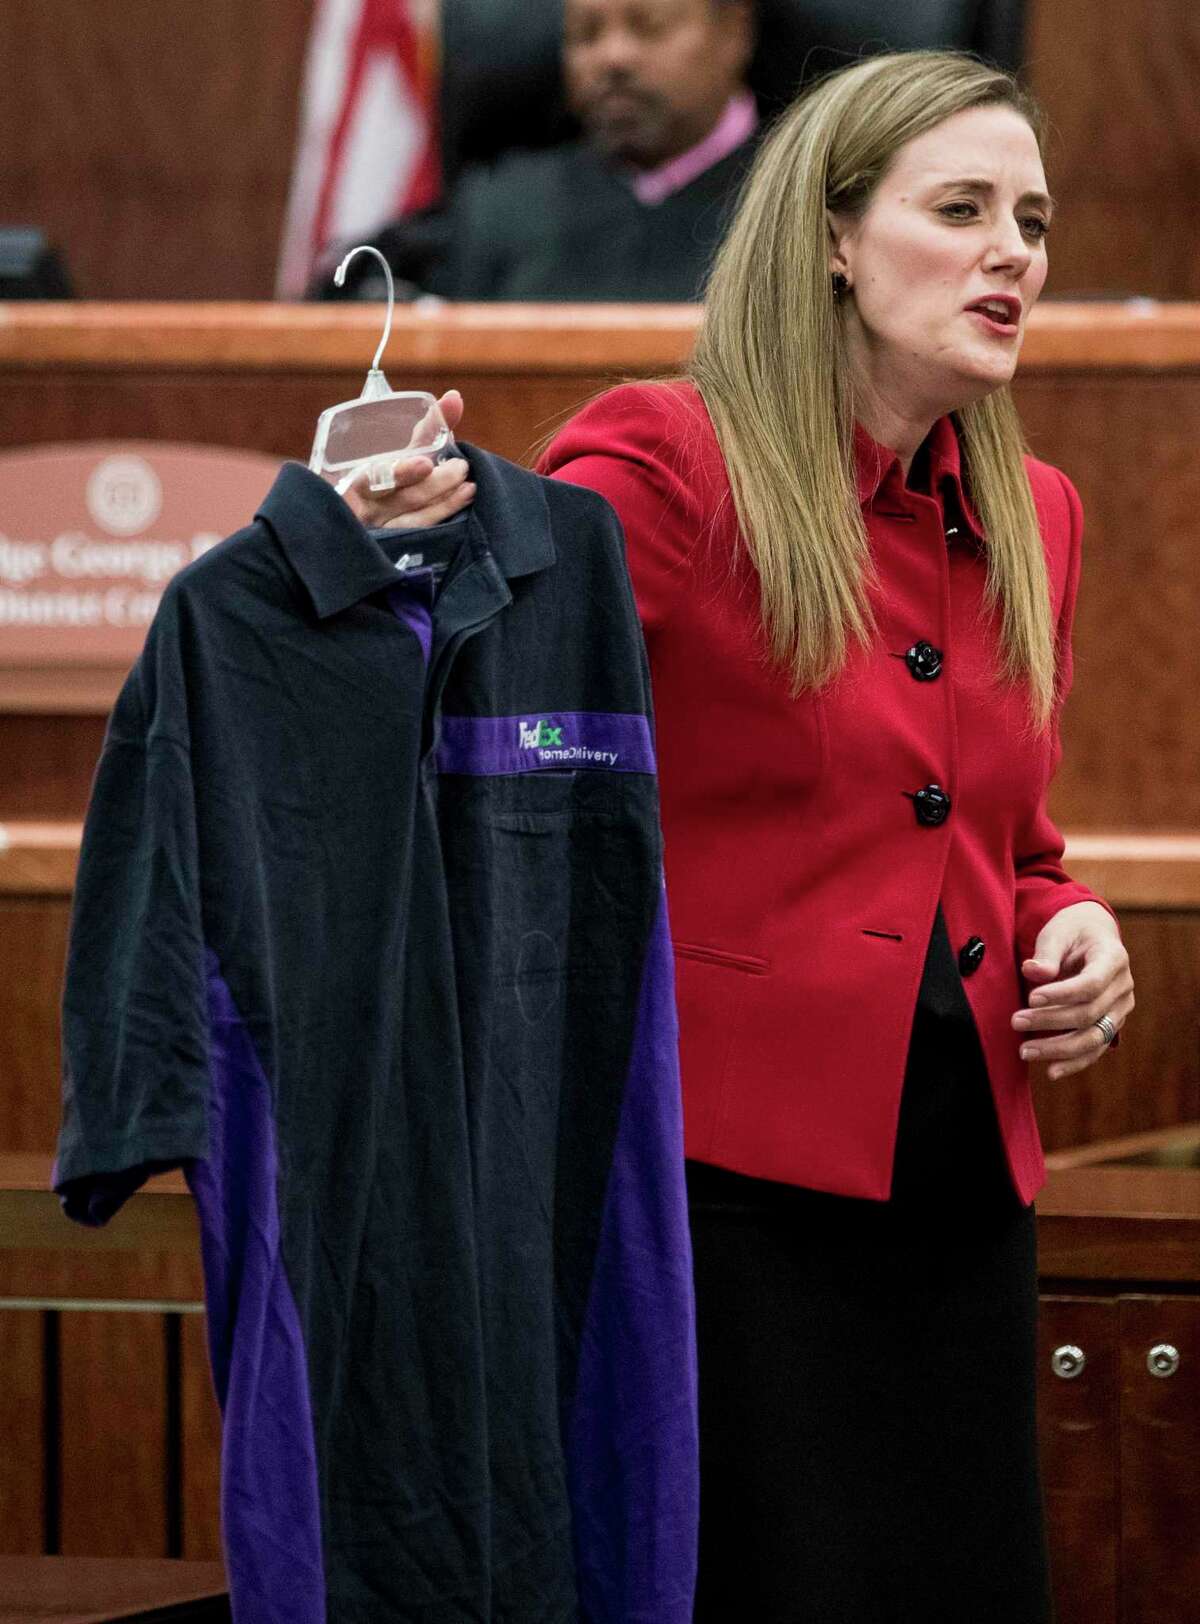 Prosecutor Samantha Knecht holds up a FedEx shirt, which was entered as evidence earlier in the trial, during the closing arguments in Ronald Haskell's capital murder trial on Wednesday, Sept. 25, 2019, in Houston. Haskell is charged with capital murder in connection with the 2014 massacre of a Spring family.